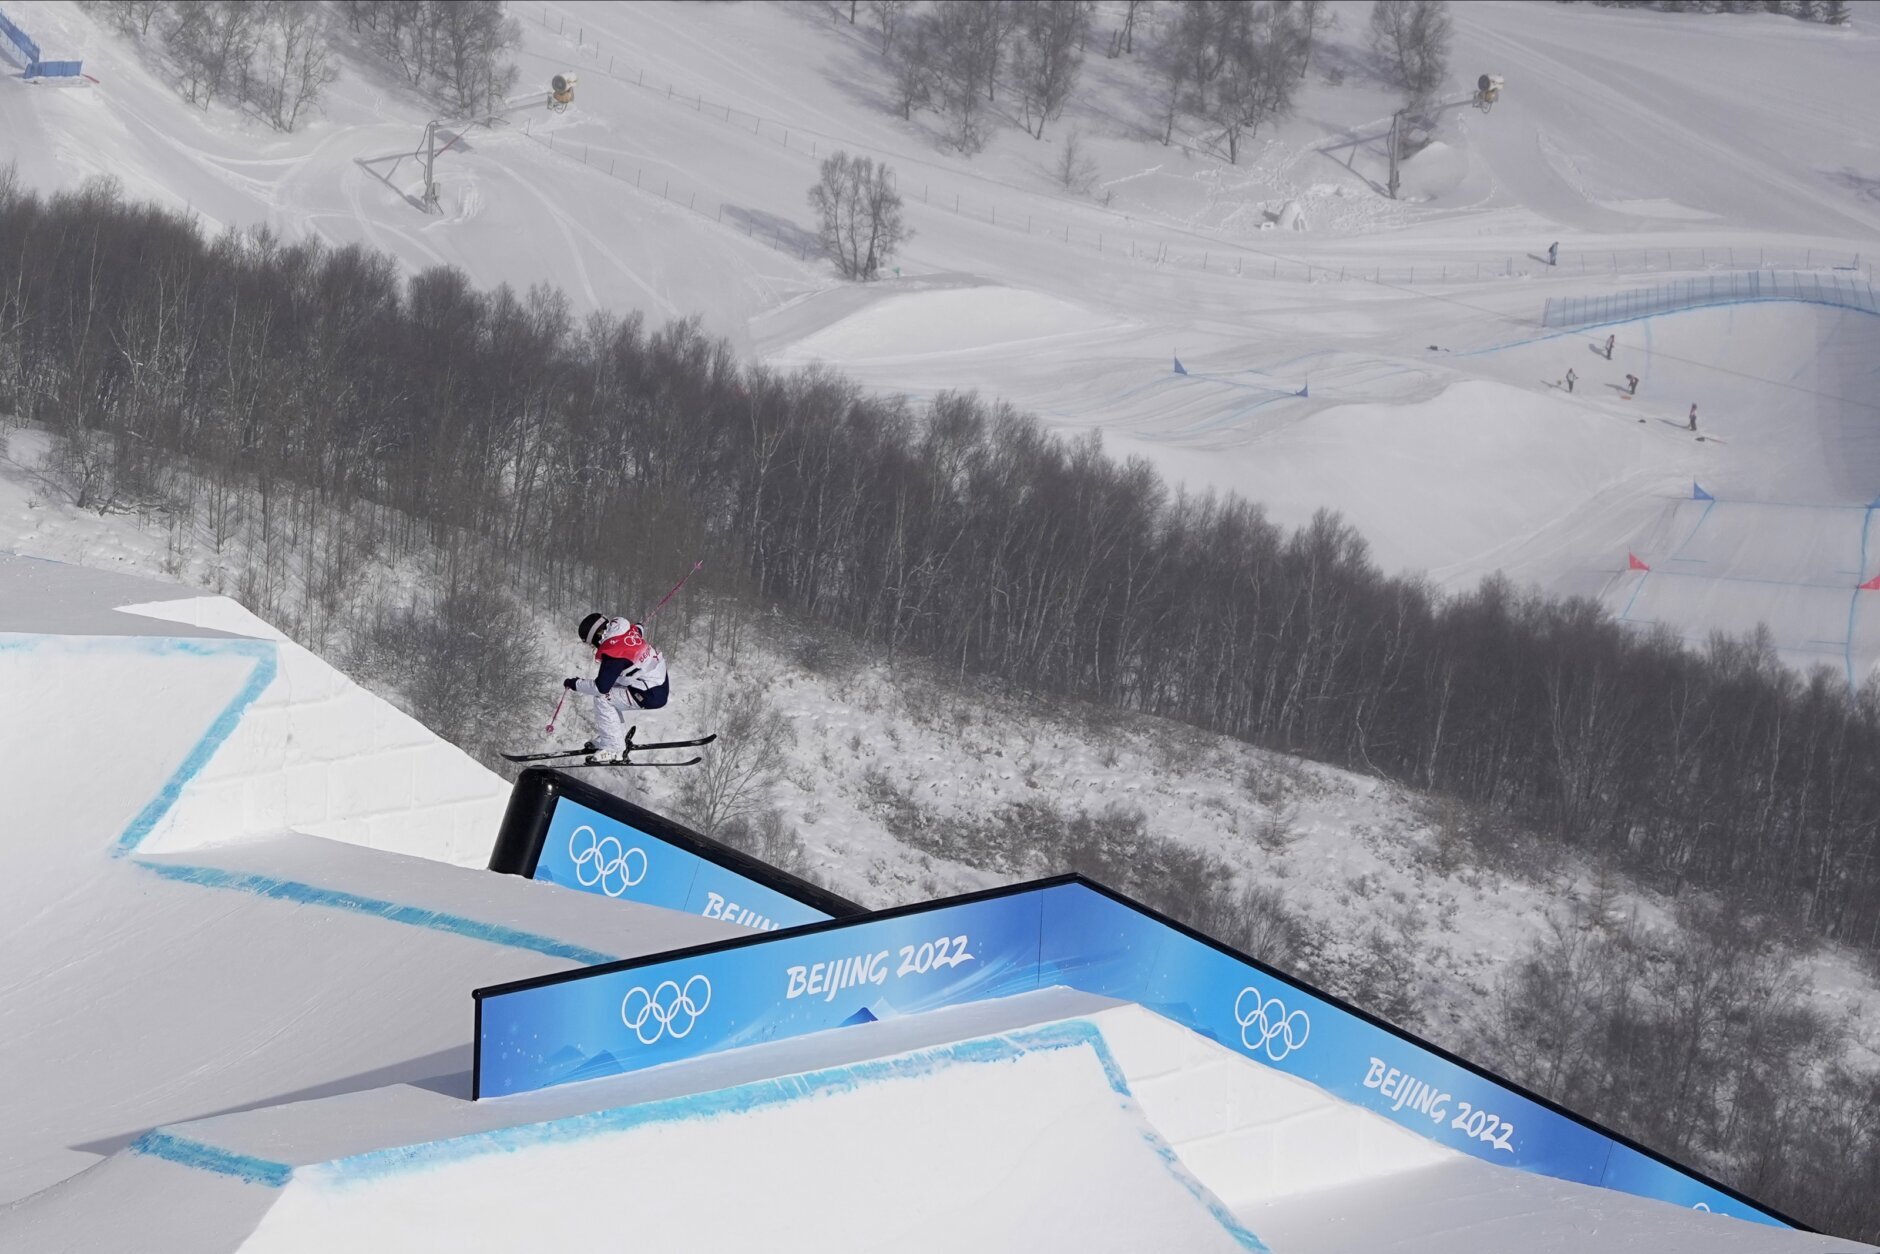 <p>United States&#8217; Maggie Voisin competes during the women&#8217;s slopestyle finals at the 2022 Winter Olympics, Tuesday, Feb. 15, 2022, in Zhangjiakou, China.</p>
